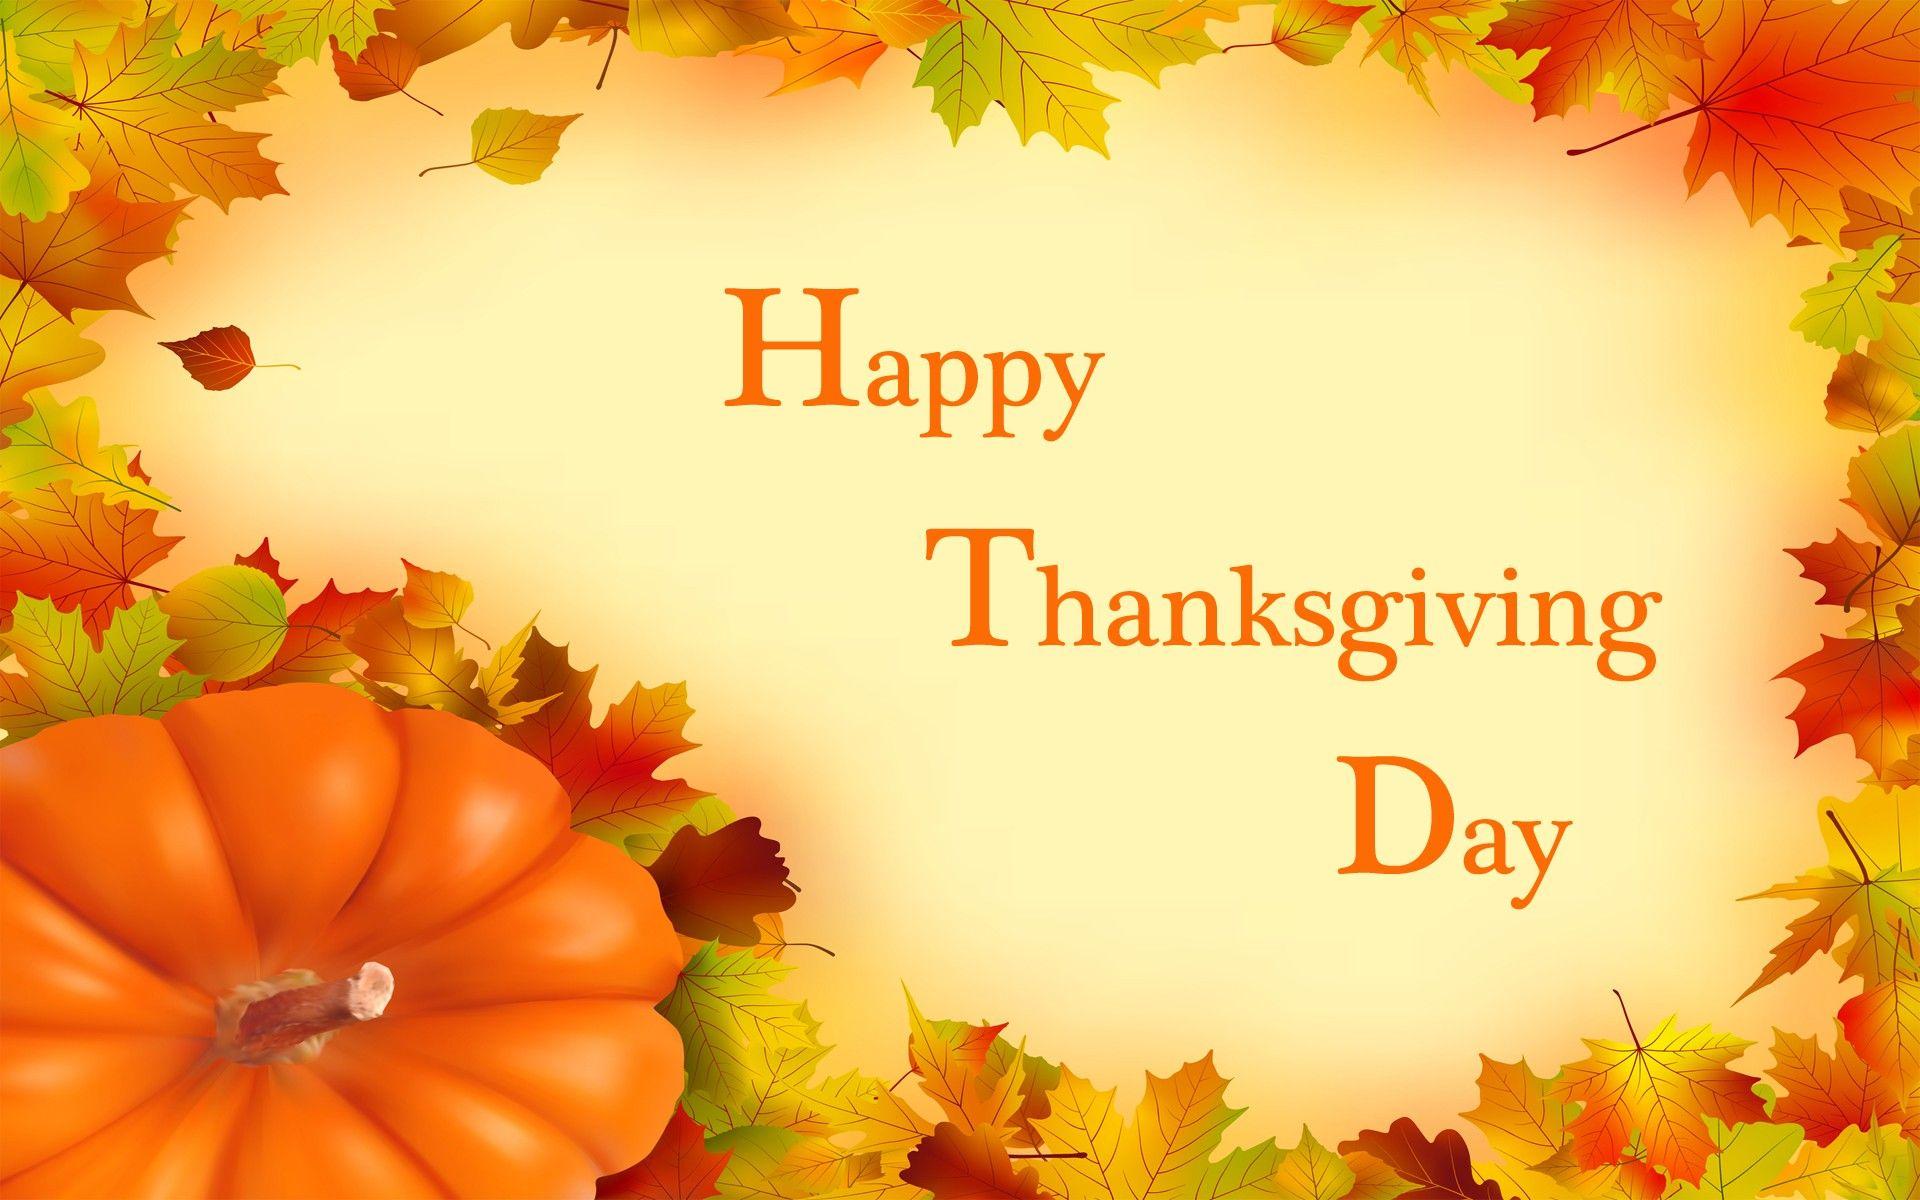 Thanksgiving day wallpapers